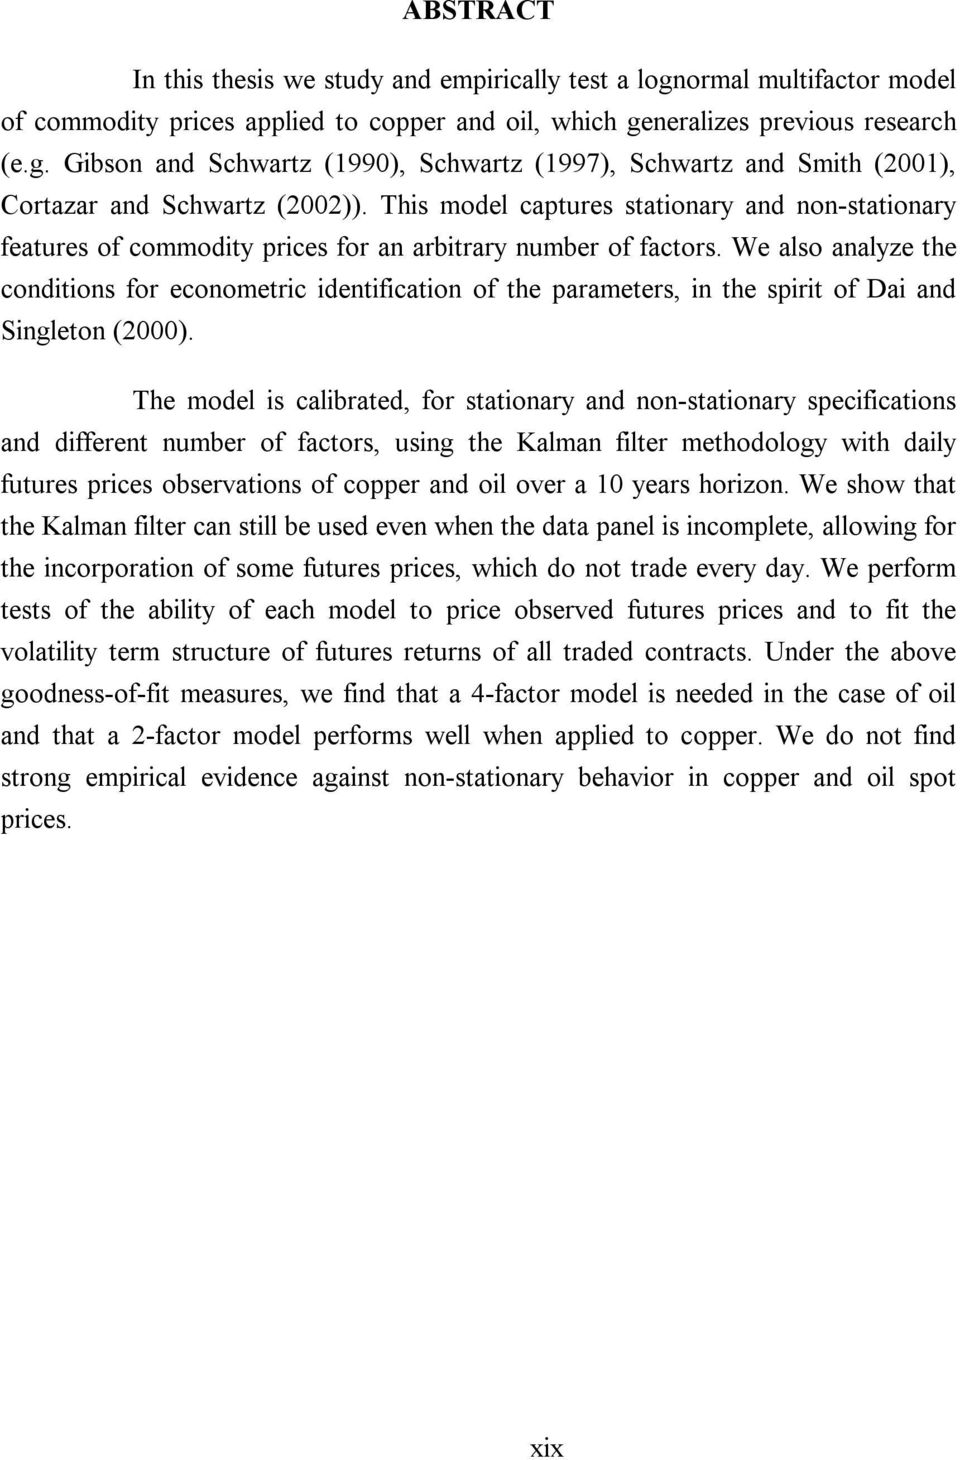 We also analyze he condiions for economeric idenificaion of he parameers, in he spiri of Dai and Singleon (2000).